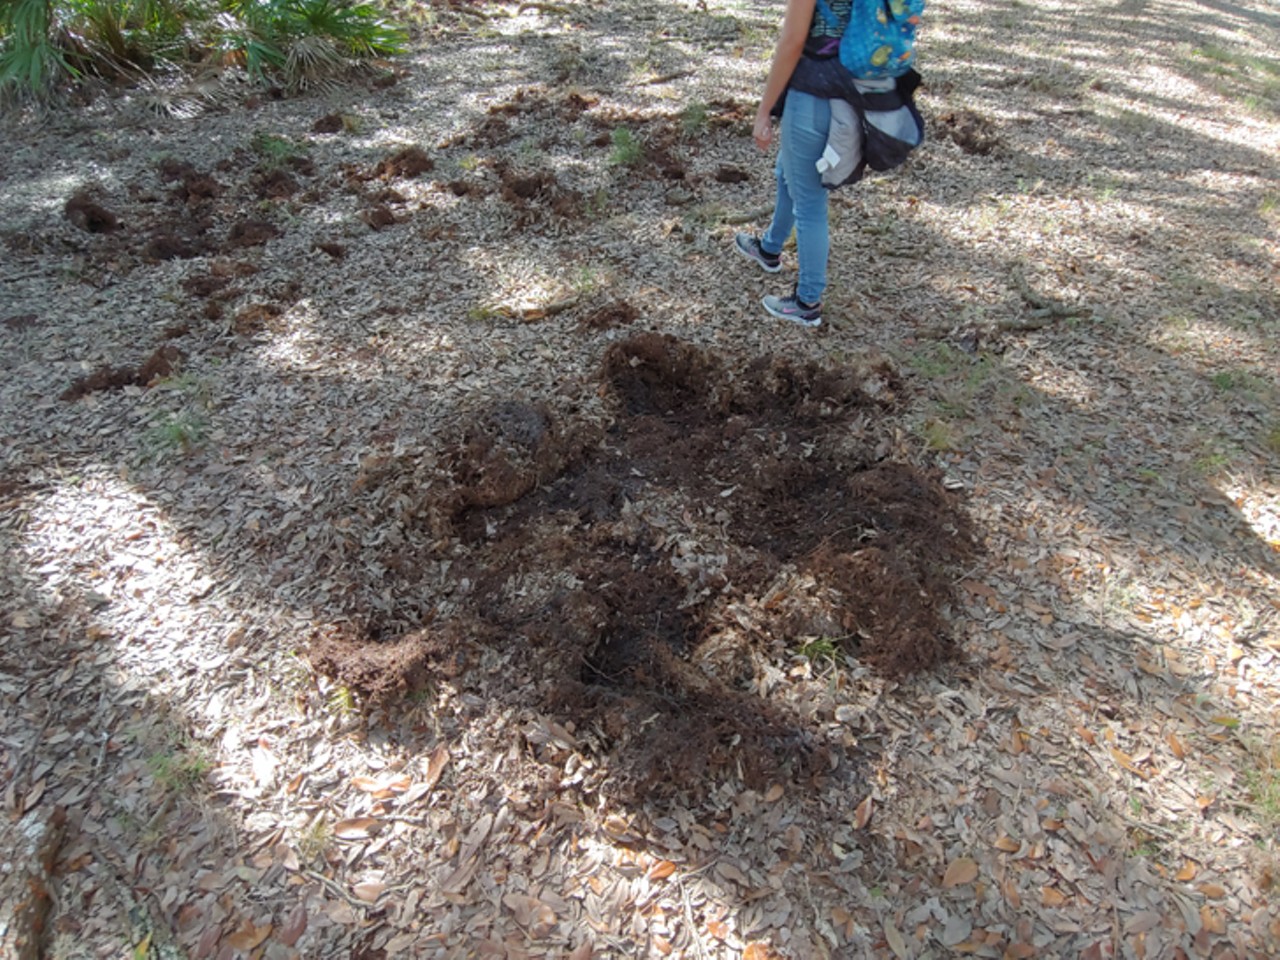 Feral hogs dig up patches of dirt and mud throughout the park.